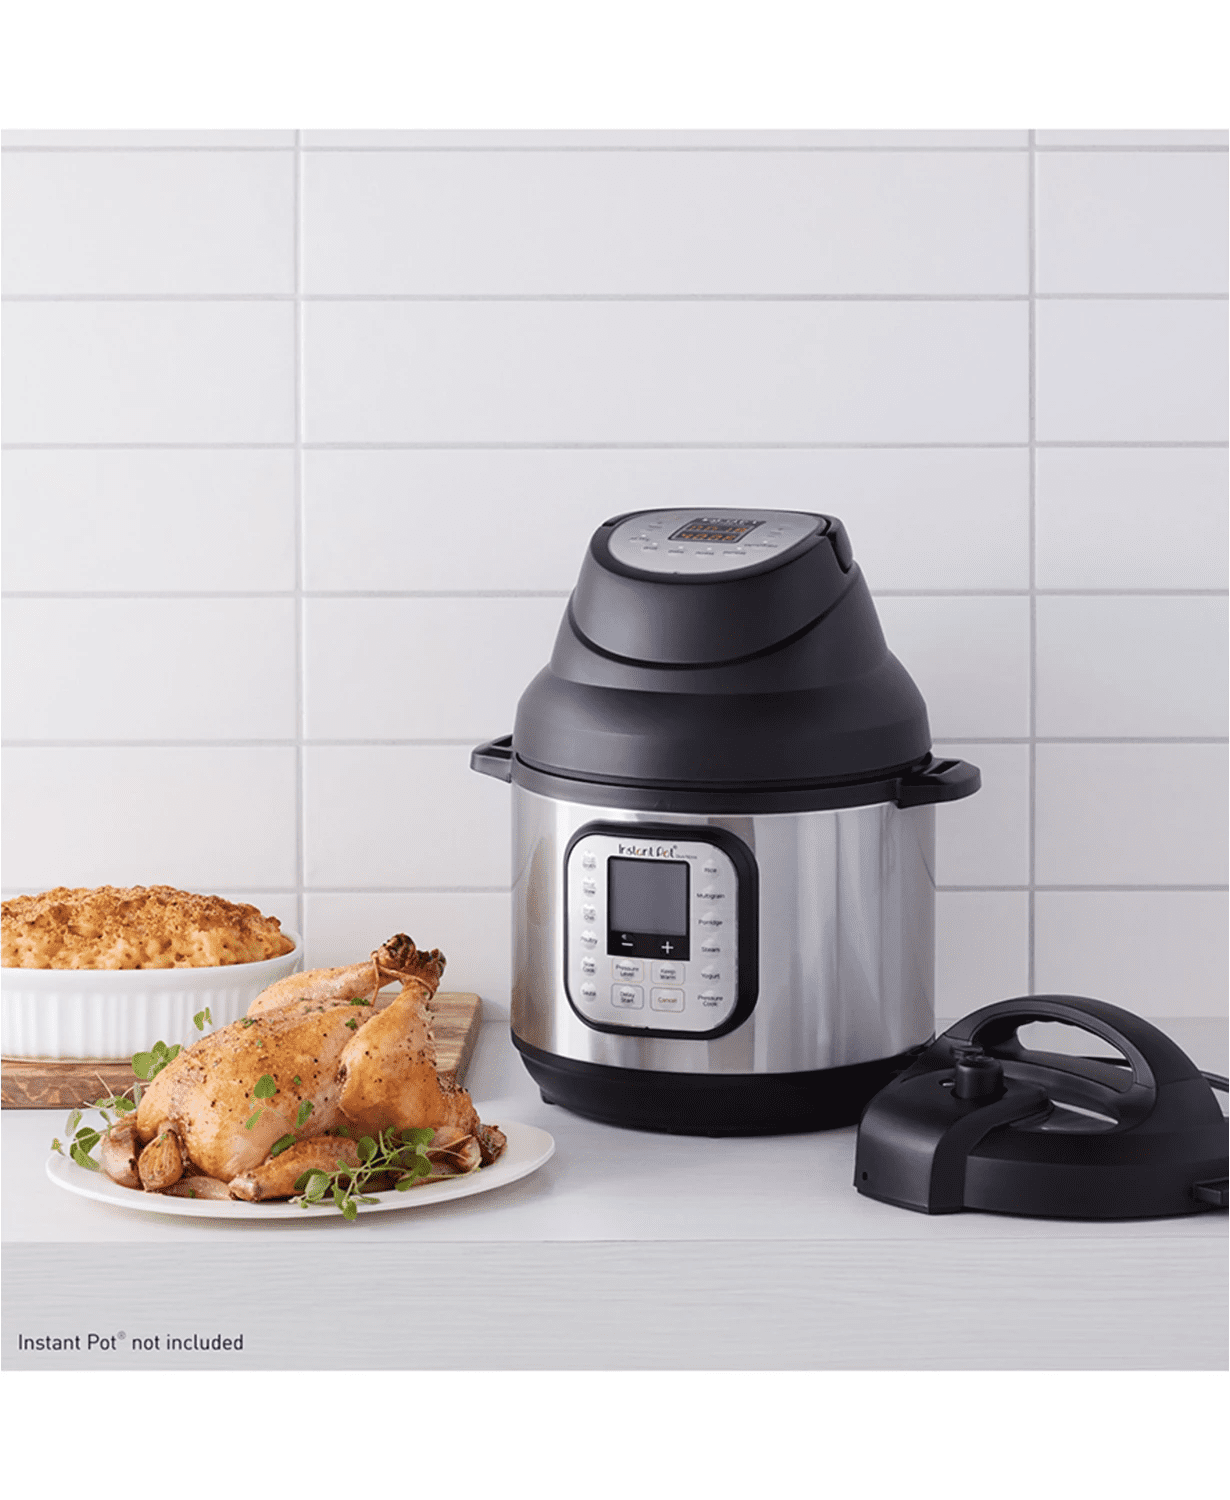 Instant Pot, 6-Quart Air Fryer Lid,​ Electric Pressure Cooker or Slow  Cooker Accessory with Roast, Bake, Crisp, Fry, Broil, Reheat, Dehydrate  Functionality 